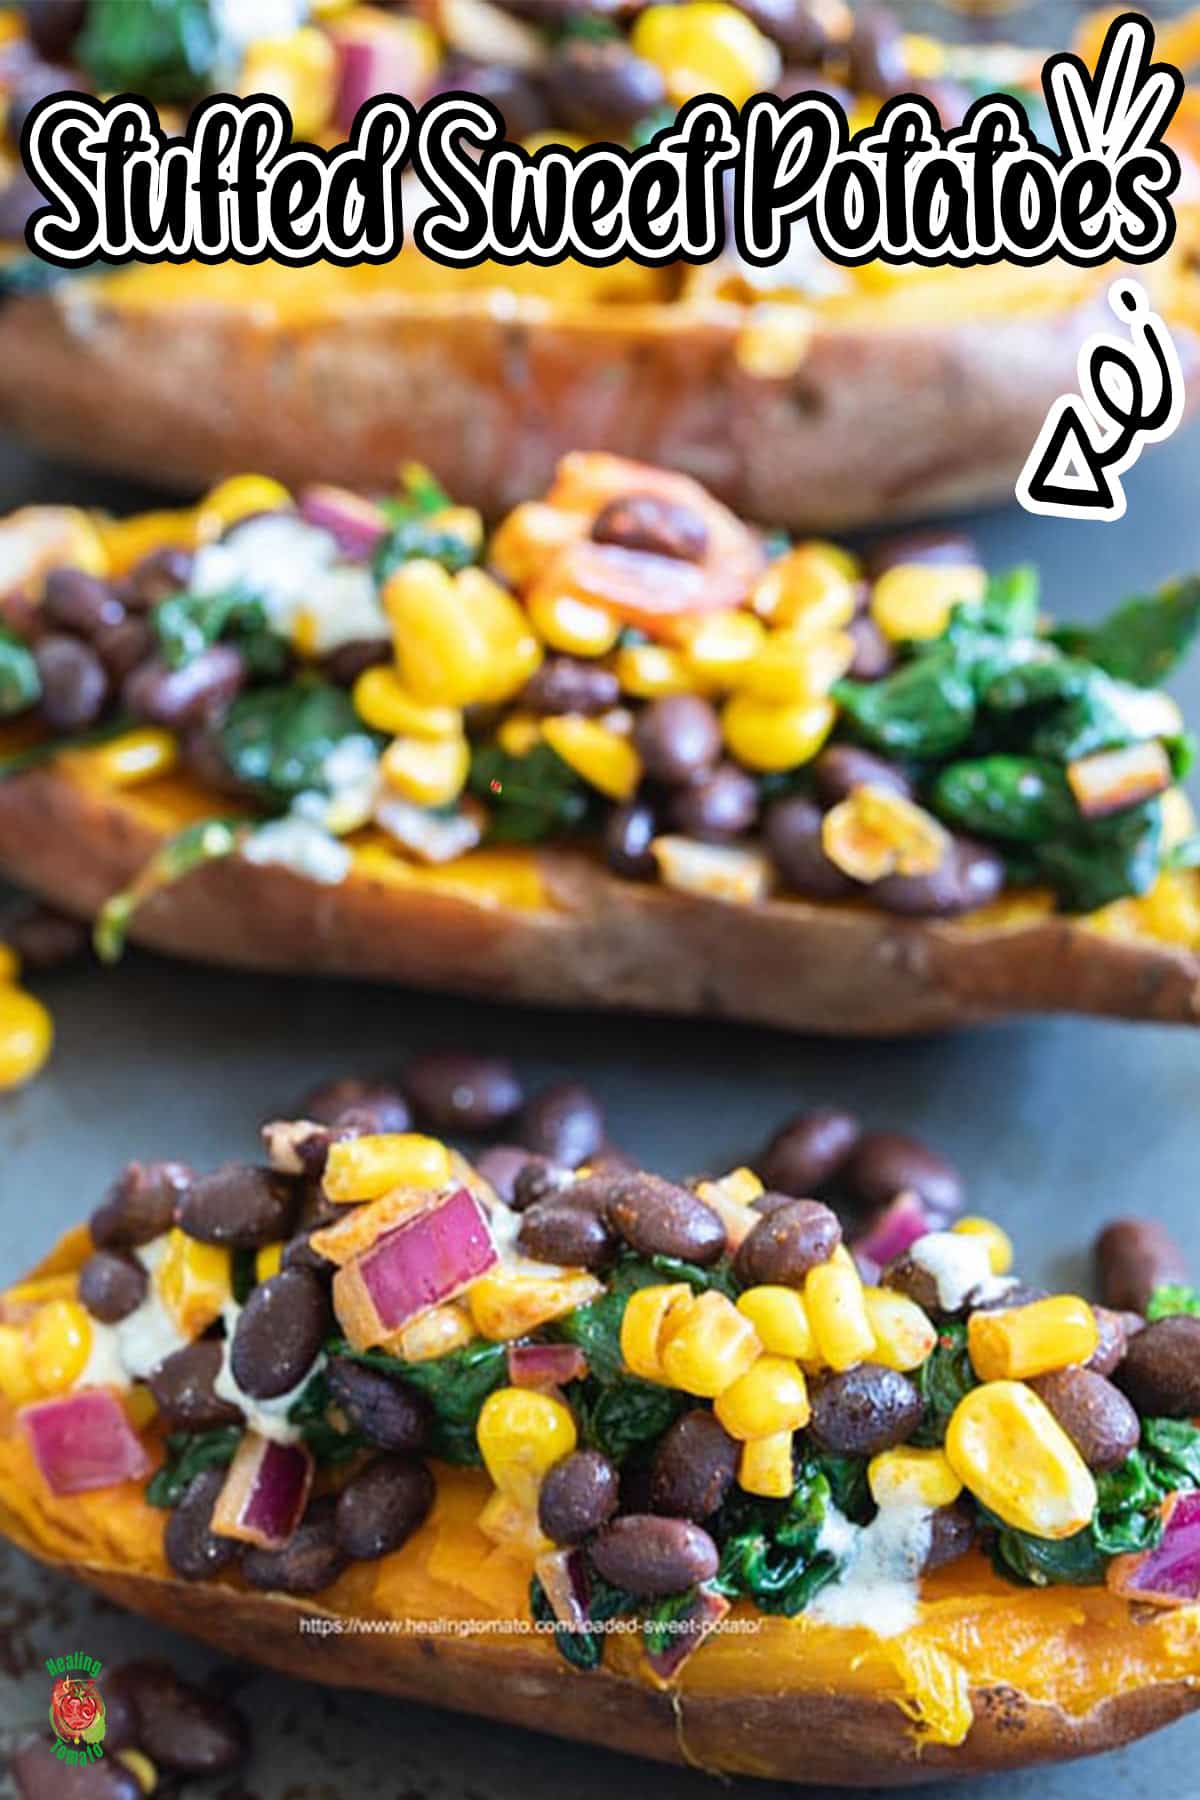 Closeup view of 3 sweet potato halves topped with black beans, corn, campari tomatoes and spinach.